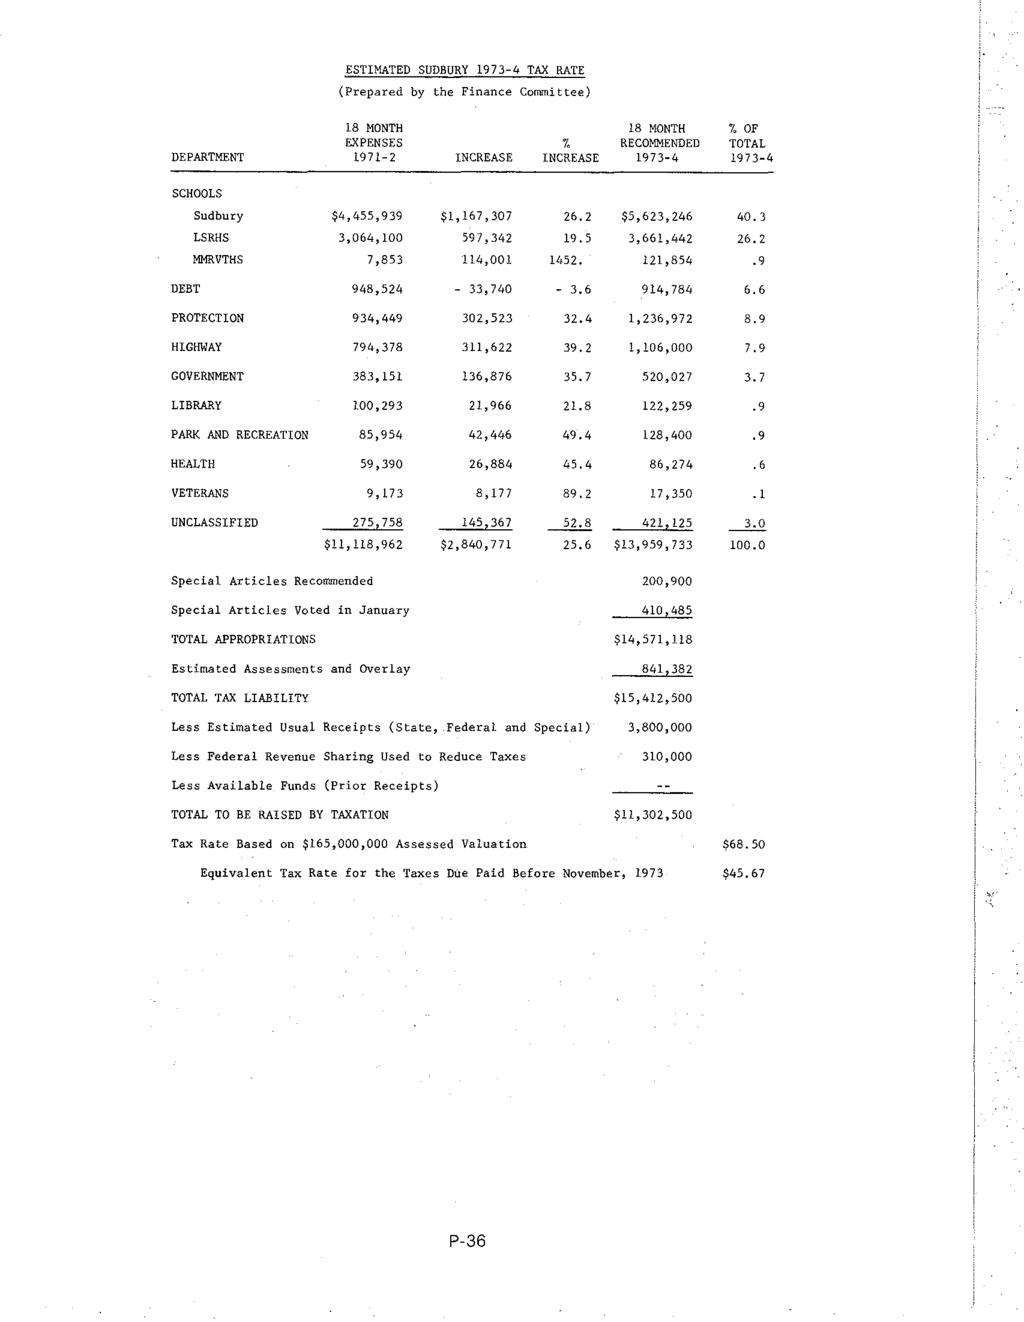 ESTIMATED SUDBURY 1973-4 TAX RATE (Prepared by the Finance Committee) DEPARTMENT 18 MONTH EXPENSES 1971-2 INCREASE 18 MONTH % RECOHMENDED INCREASE 1973-4 io OF TOTAL 1973-4 SCHOOLS Sudbury LSRHS